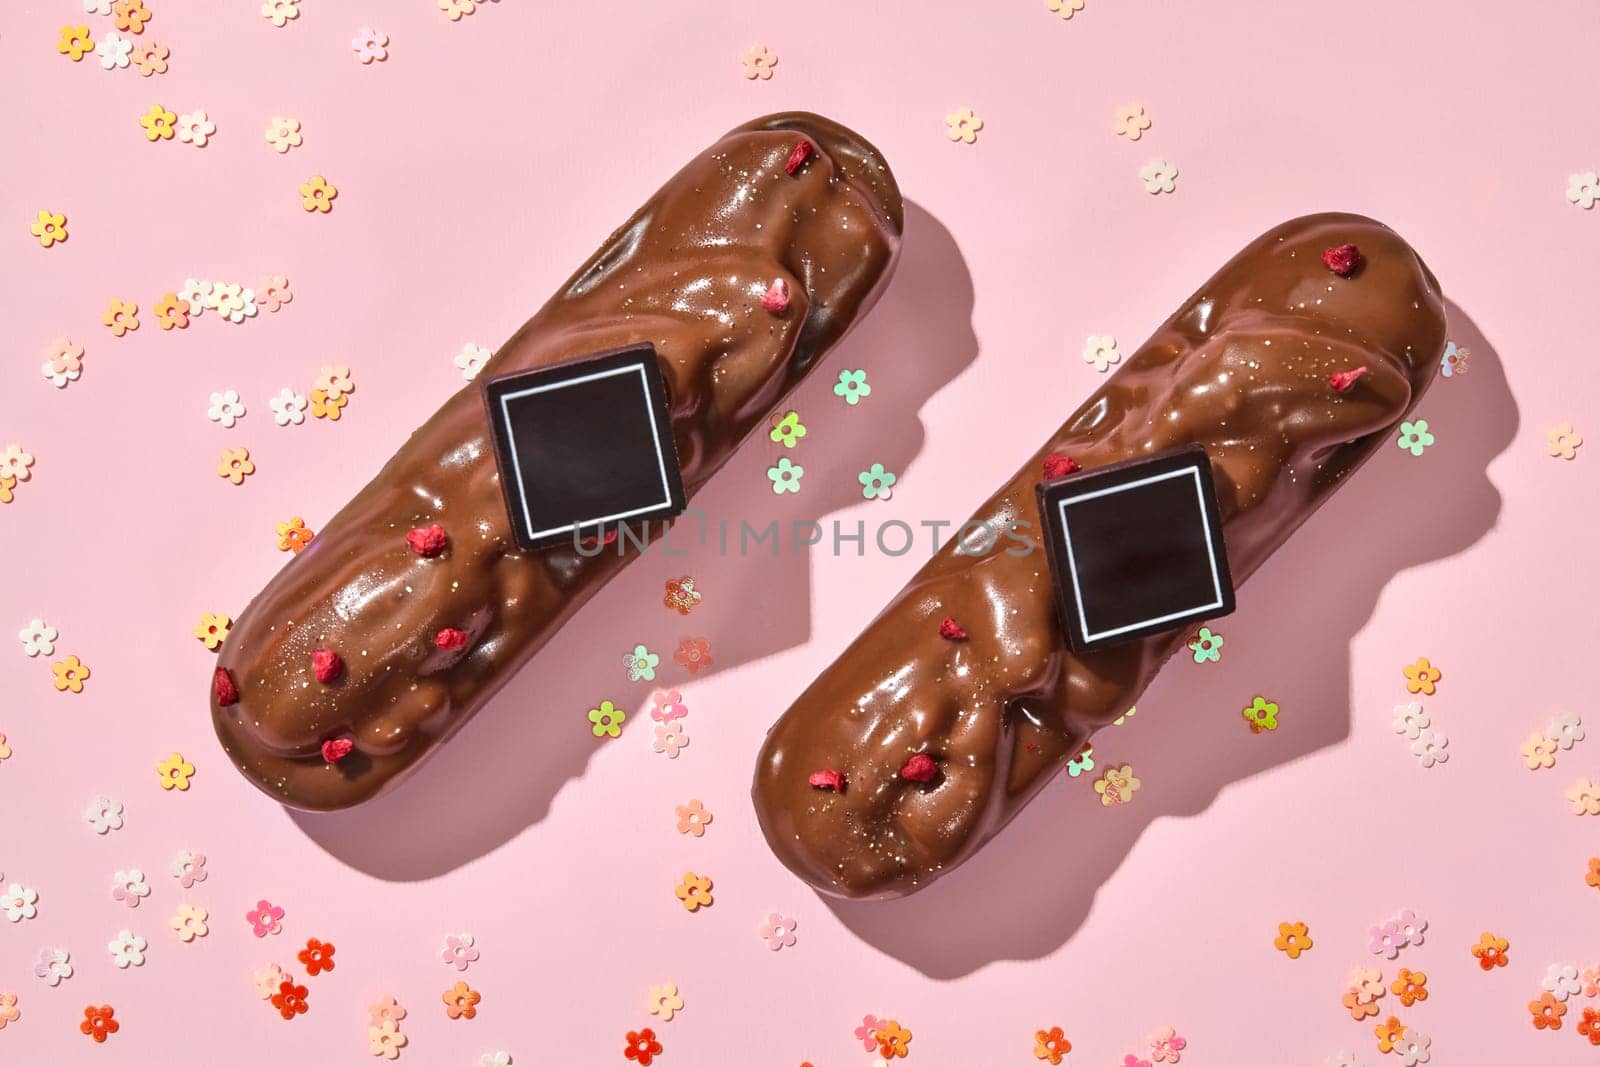 Top view of two milk chocolate-covered pecan bars, sprinkled with dried berry pieces, elegantly presented on pink background with scattered colorful flowers shaped confetti